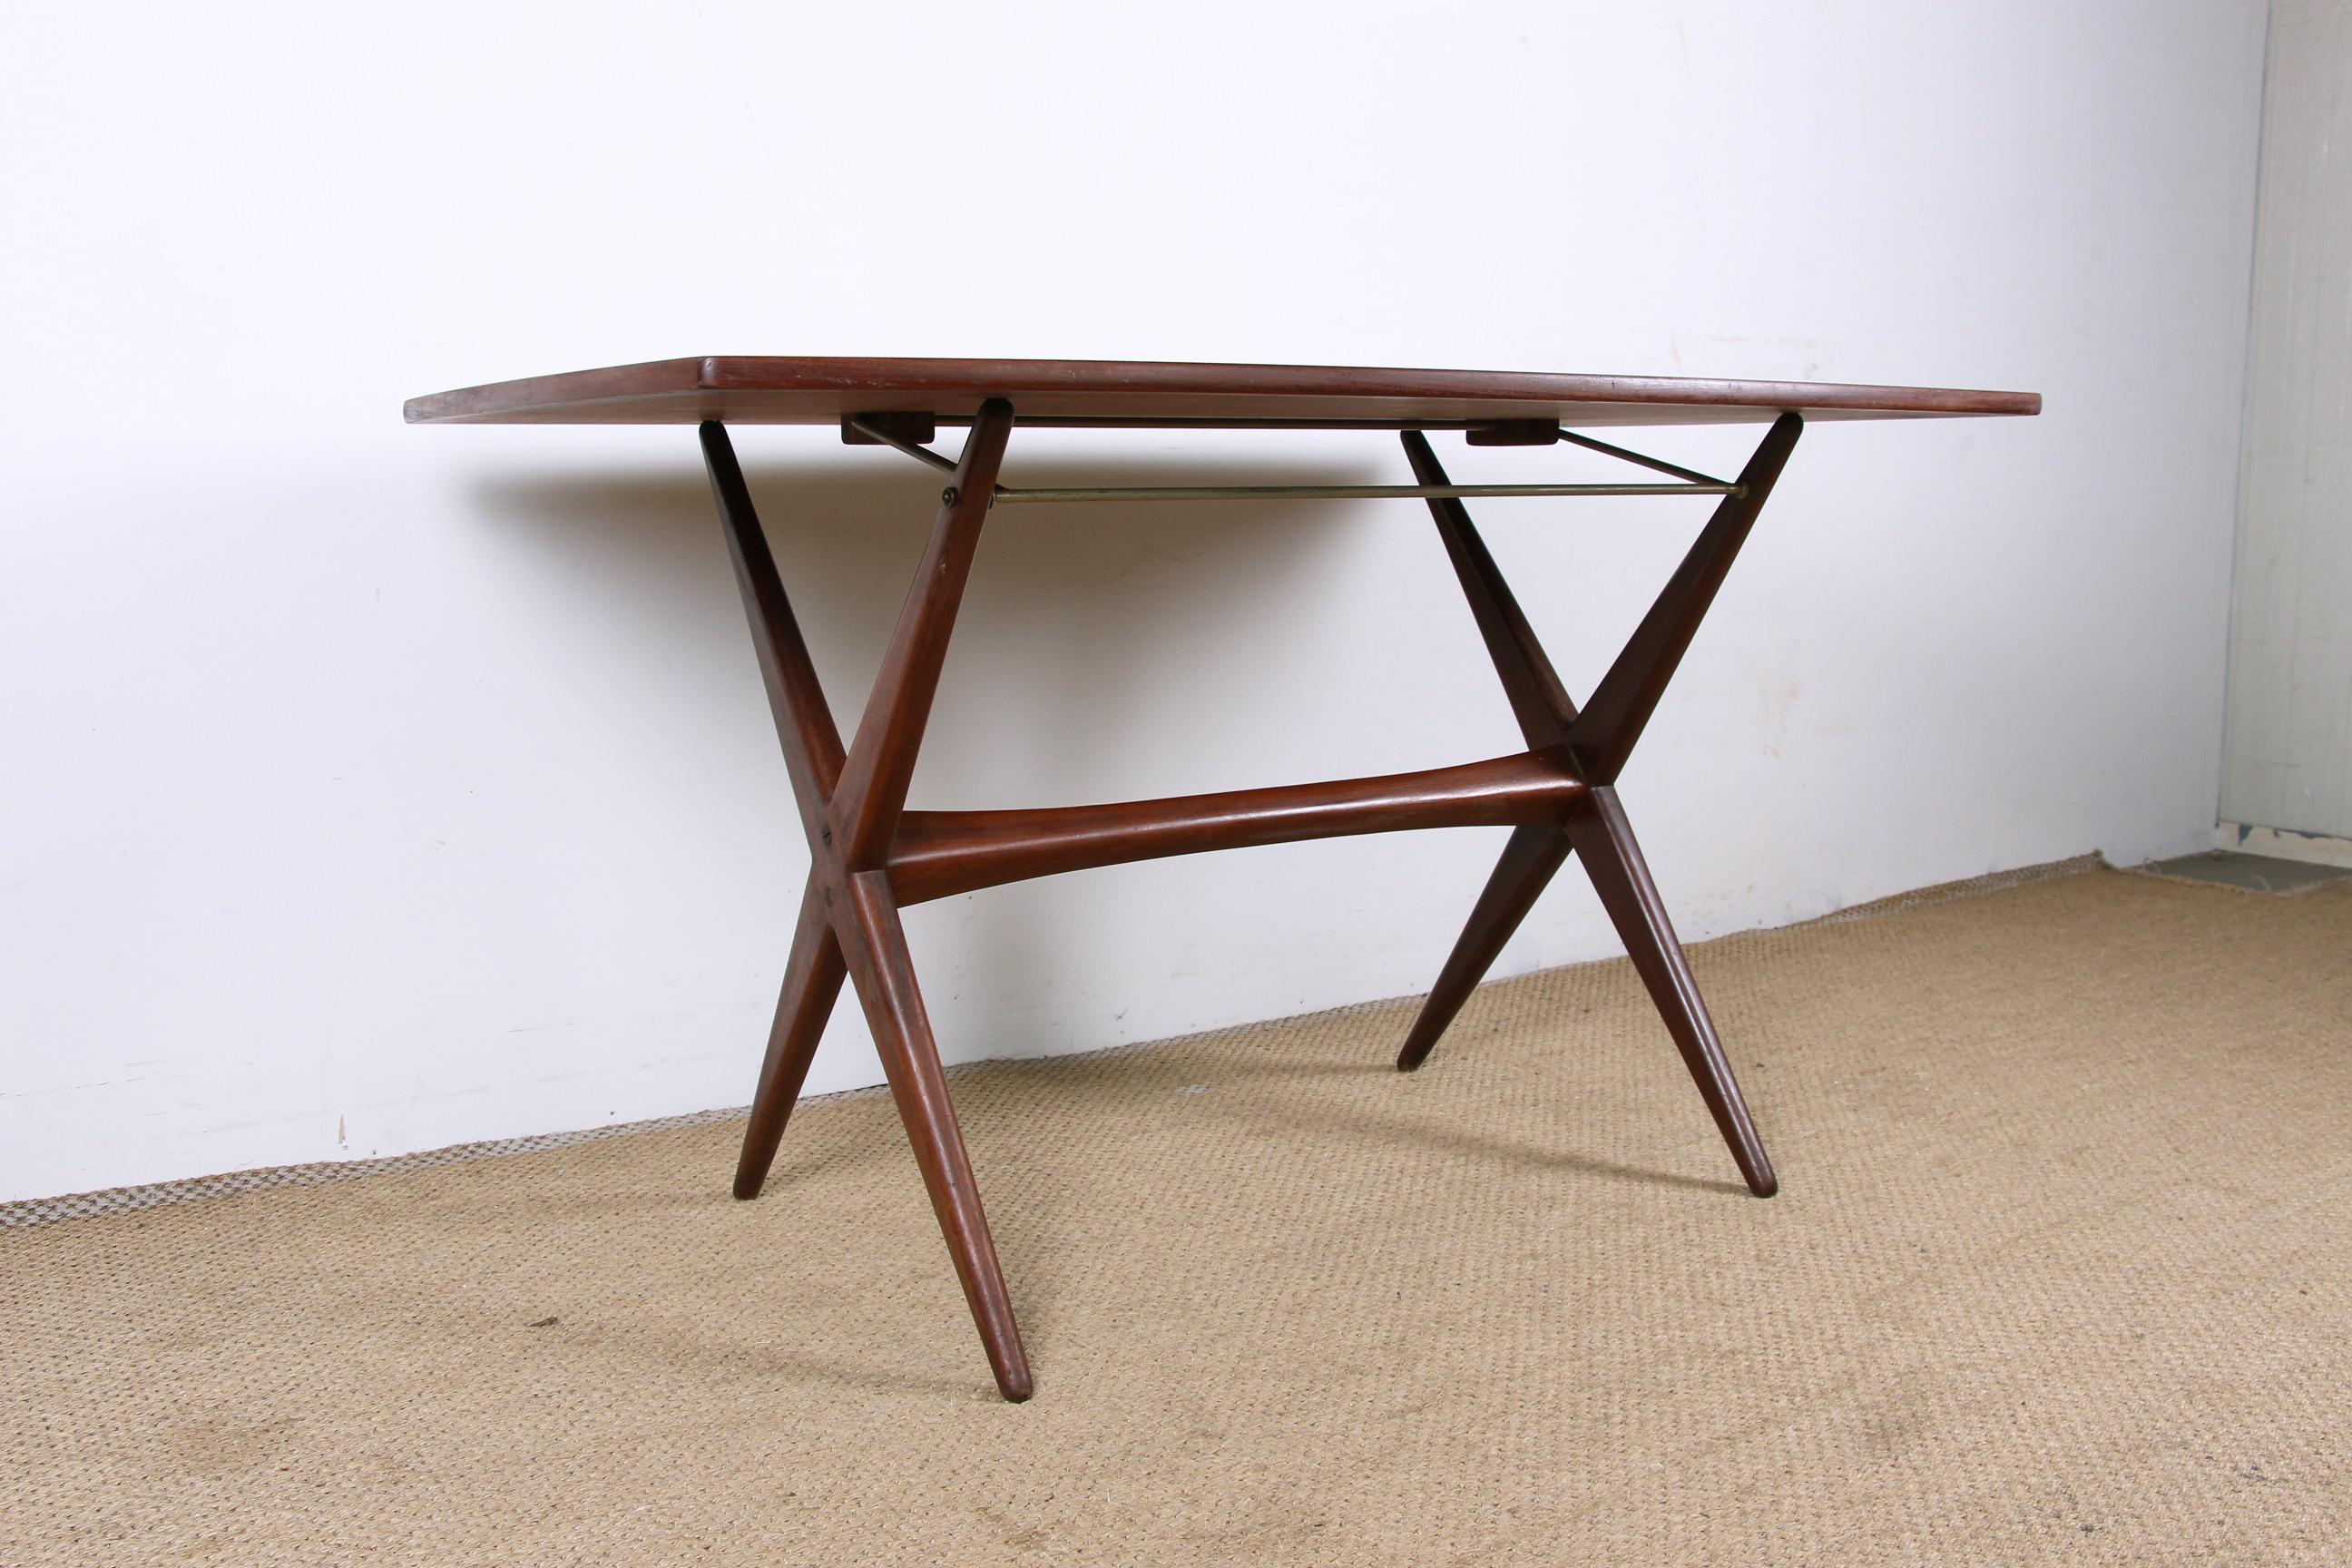 Rare and clever table that can be used as a dining table or as a large coffee table. 
A clever brass mechanism makes it easy to change the height of the table. 
With its double X-shaped base connected by a spacer and its slightly oblong top, it